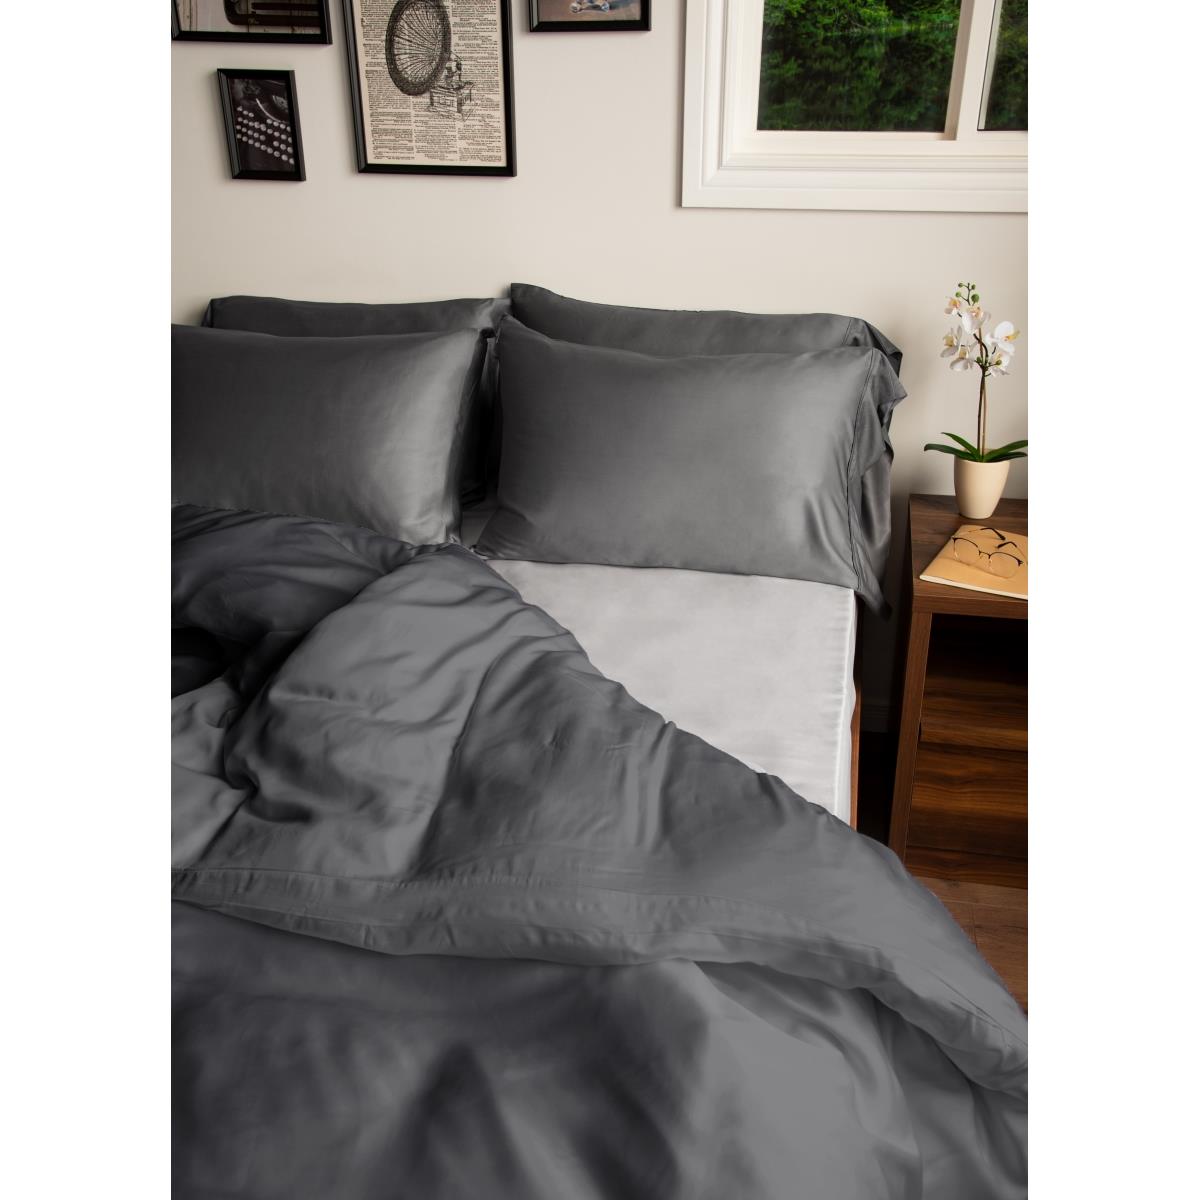 UNB-500-8591 All Seasons Bamboo Comforter Cover for Queen Size Bed, Pewter -  Signature Home